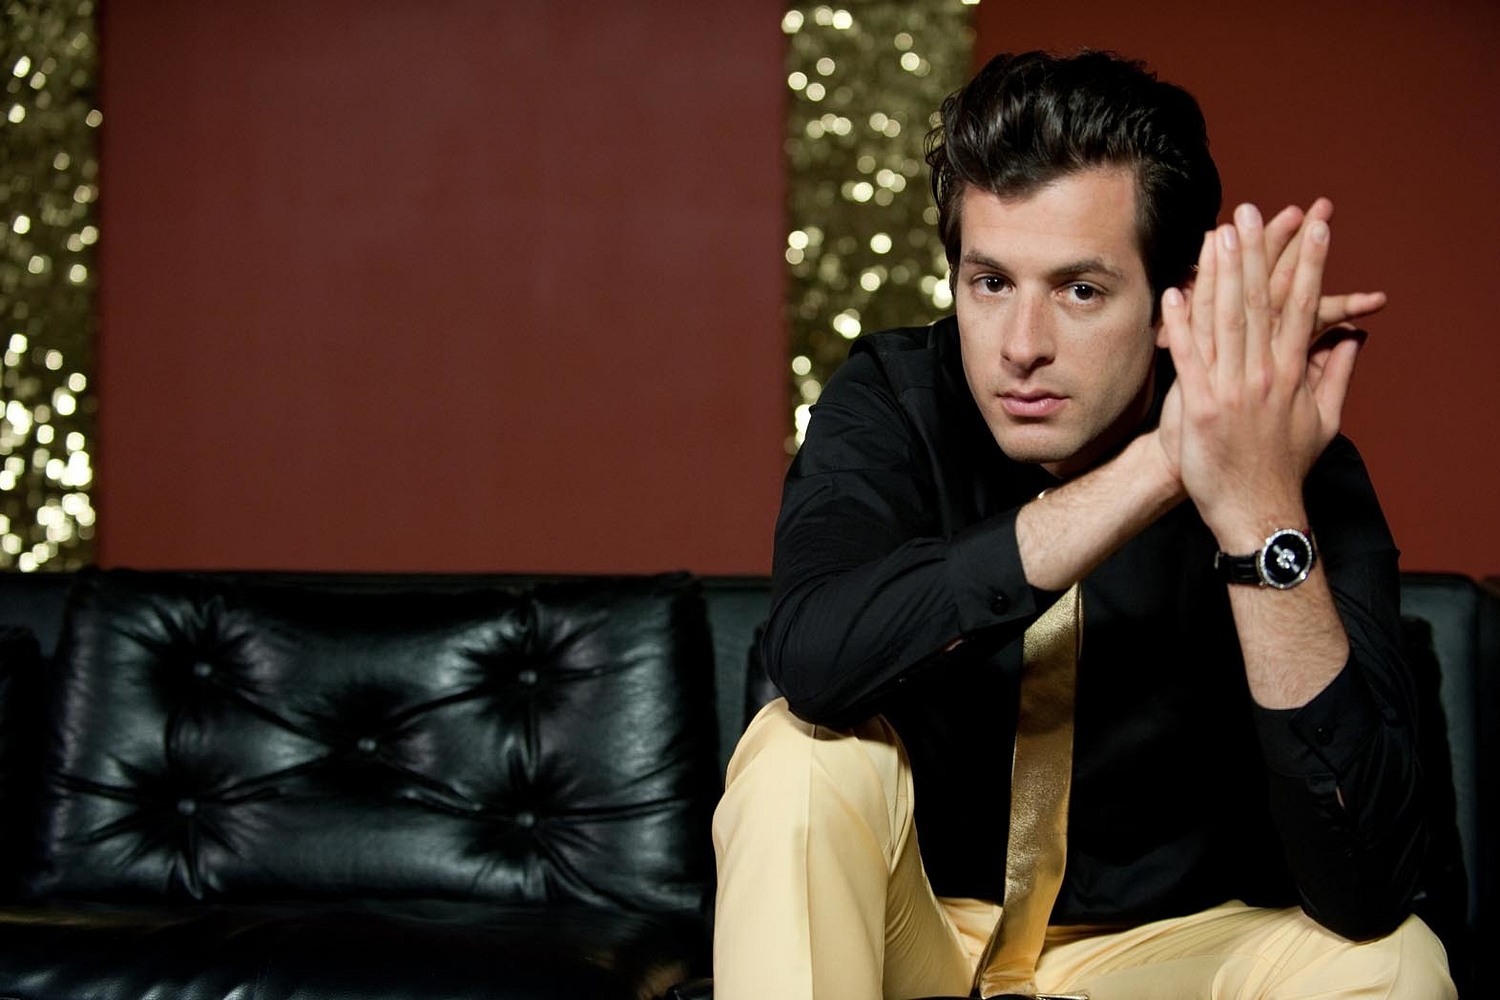 Hear Mark Ronson’s new track ‘Pieces Of Us’ featuring King Princess